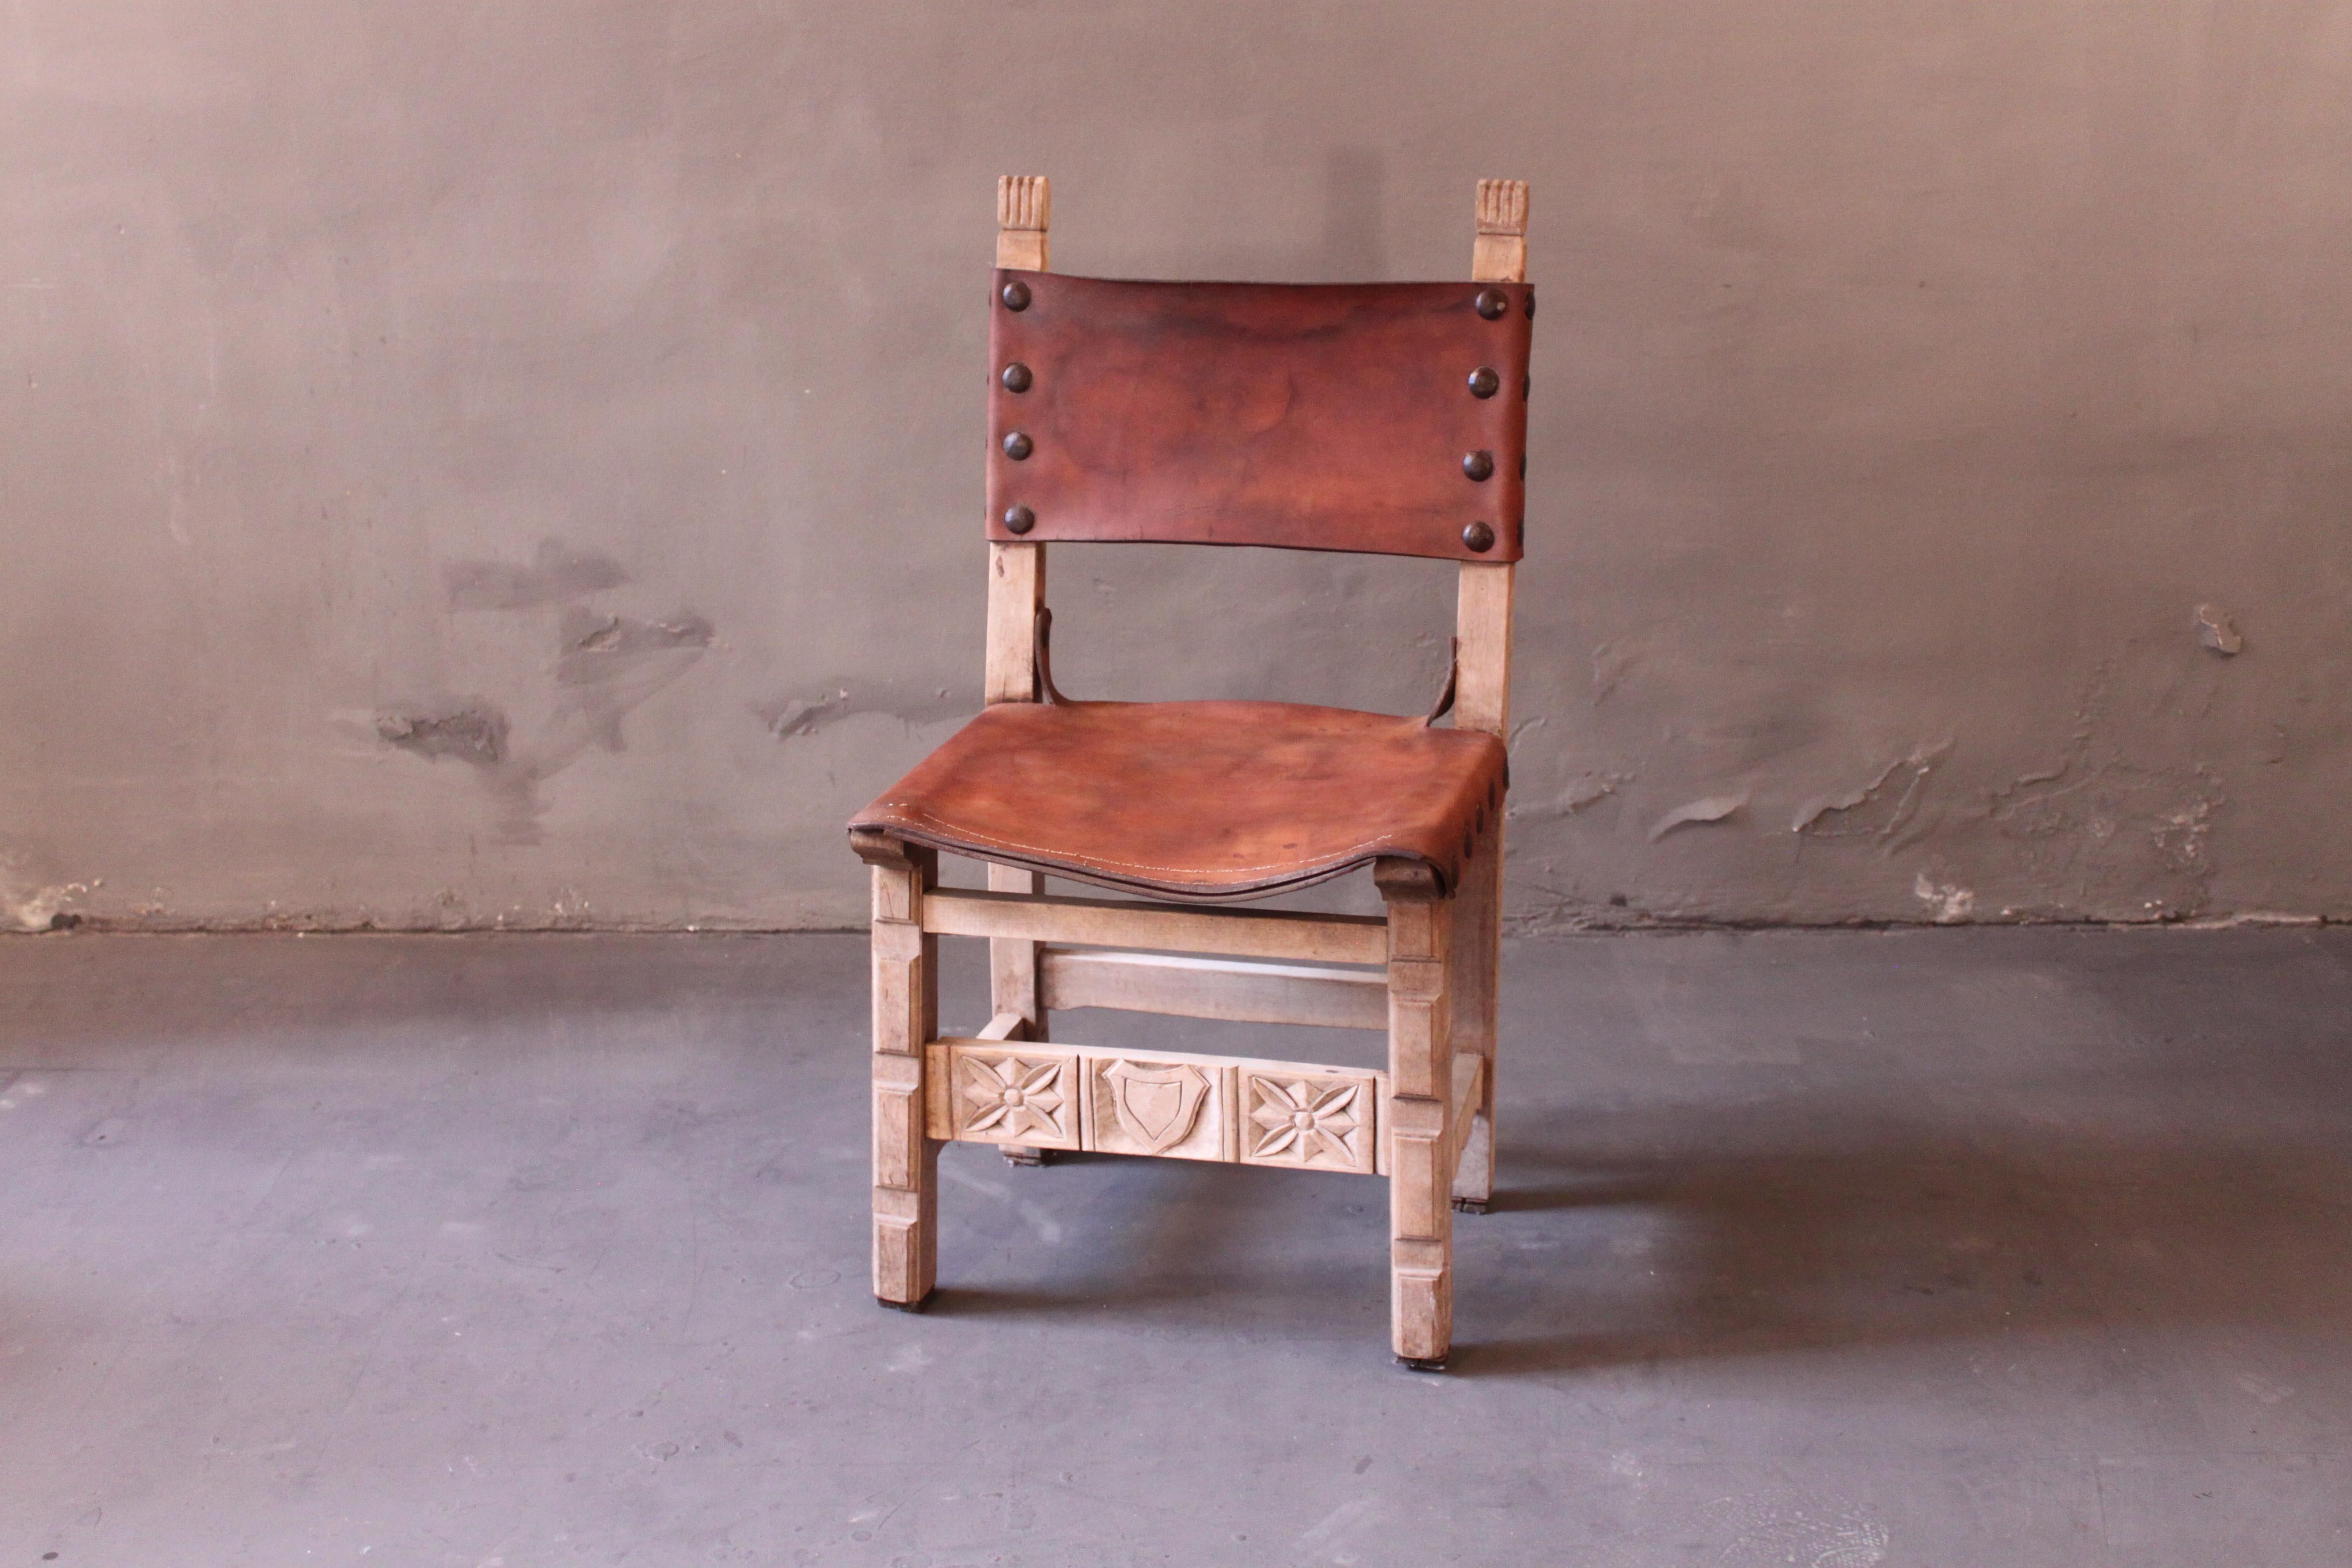 German Castle Chairs, Leather seat, Oak frame. These chairs can be found at Country homes all over Europe. Very stabil, great patina.
Thick leather beautifully patinated, solid wood structure in thick pieces and large metal upholsterer's nails, this